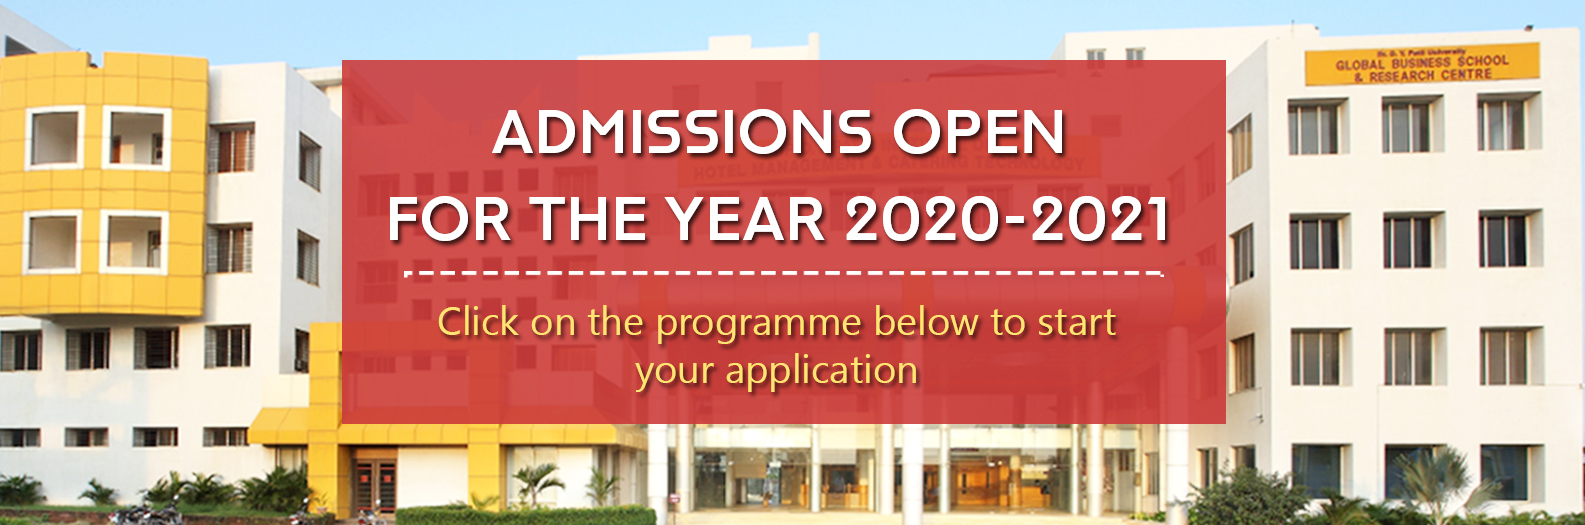 Admissions Open 202021